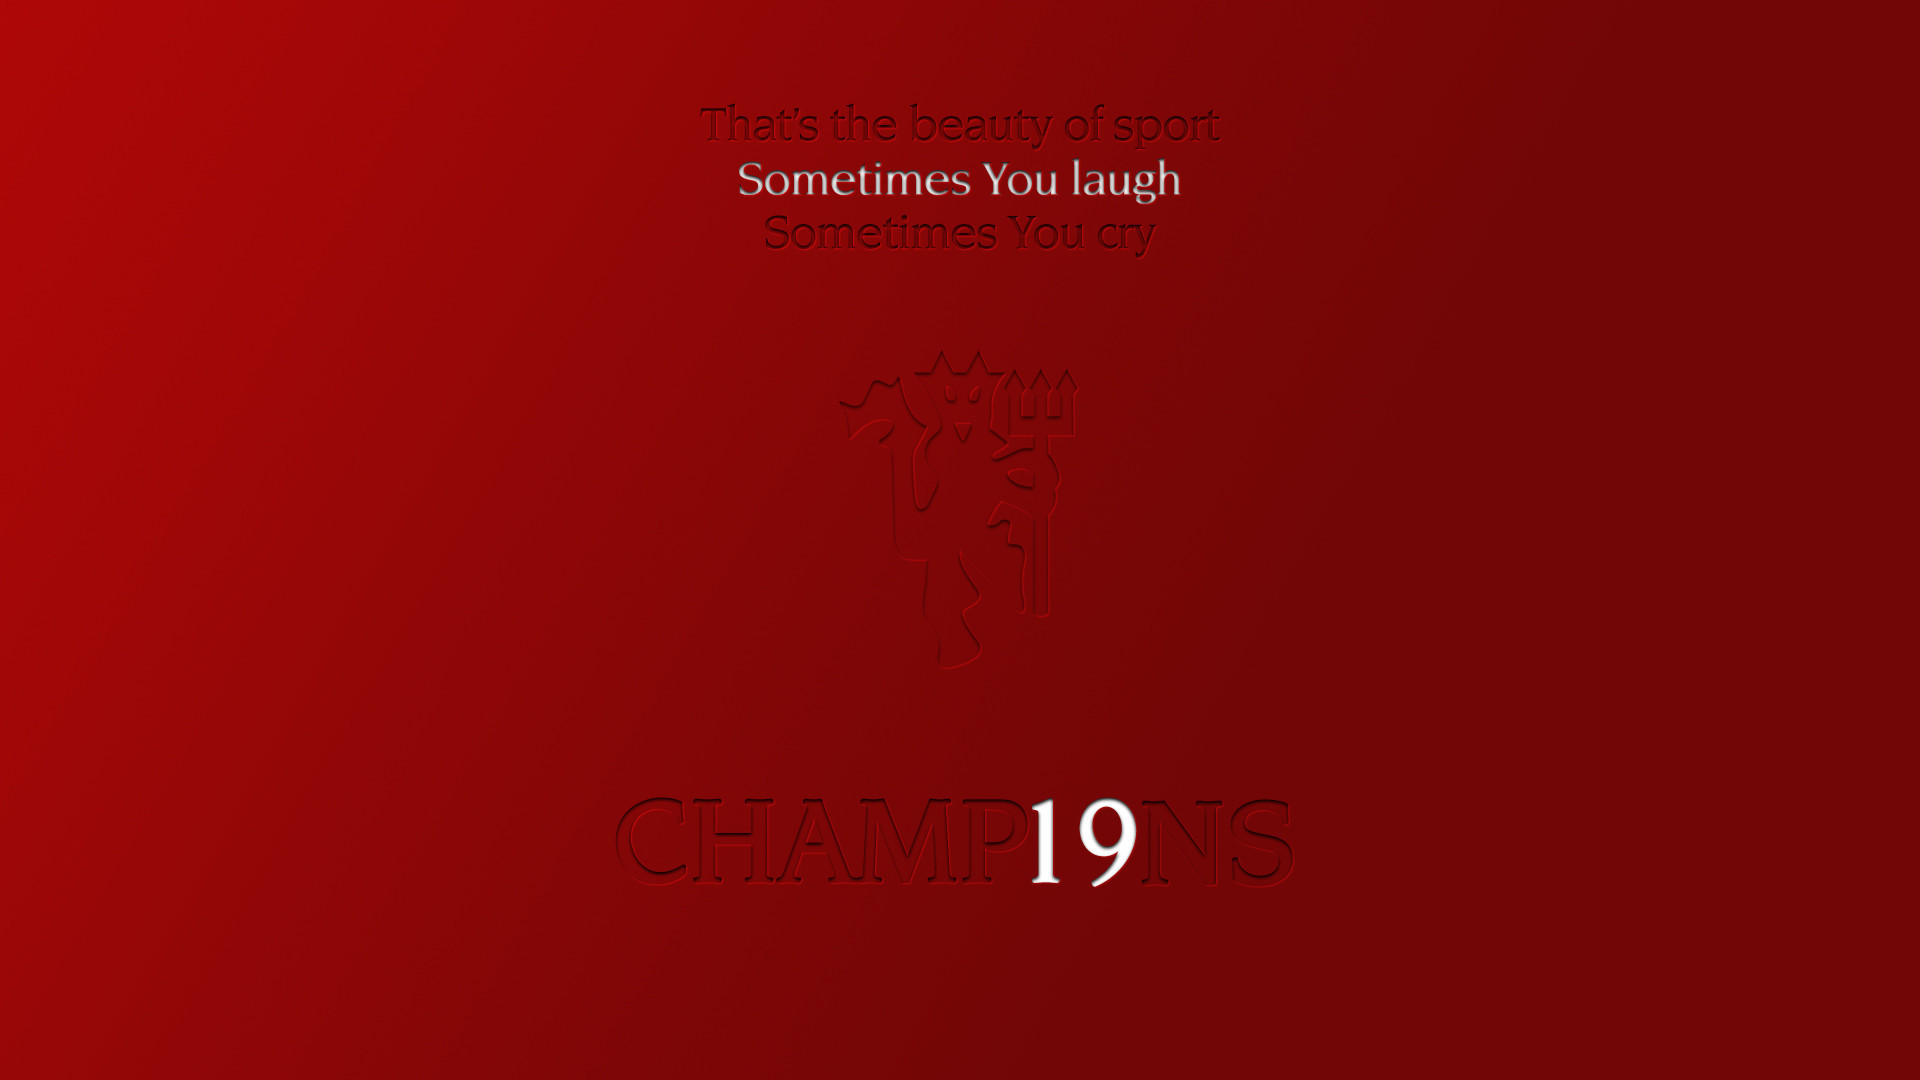 hinh nen manchester united 33 - wallpaper free download